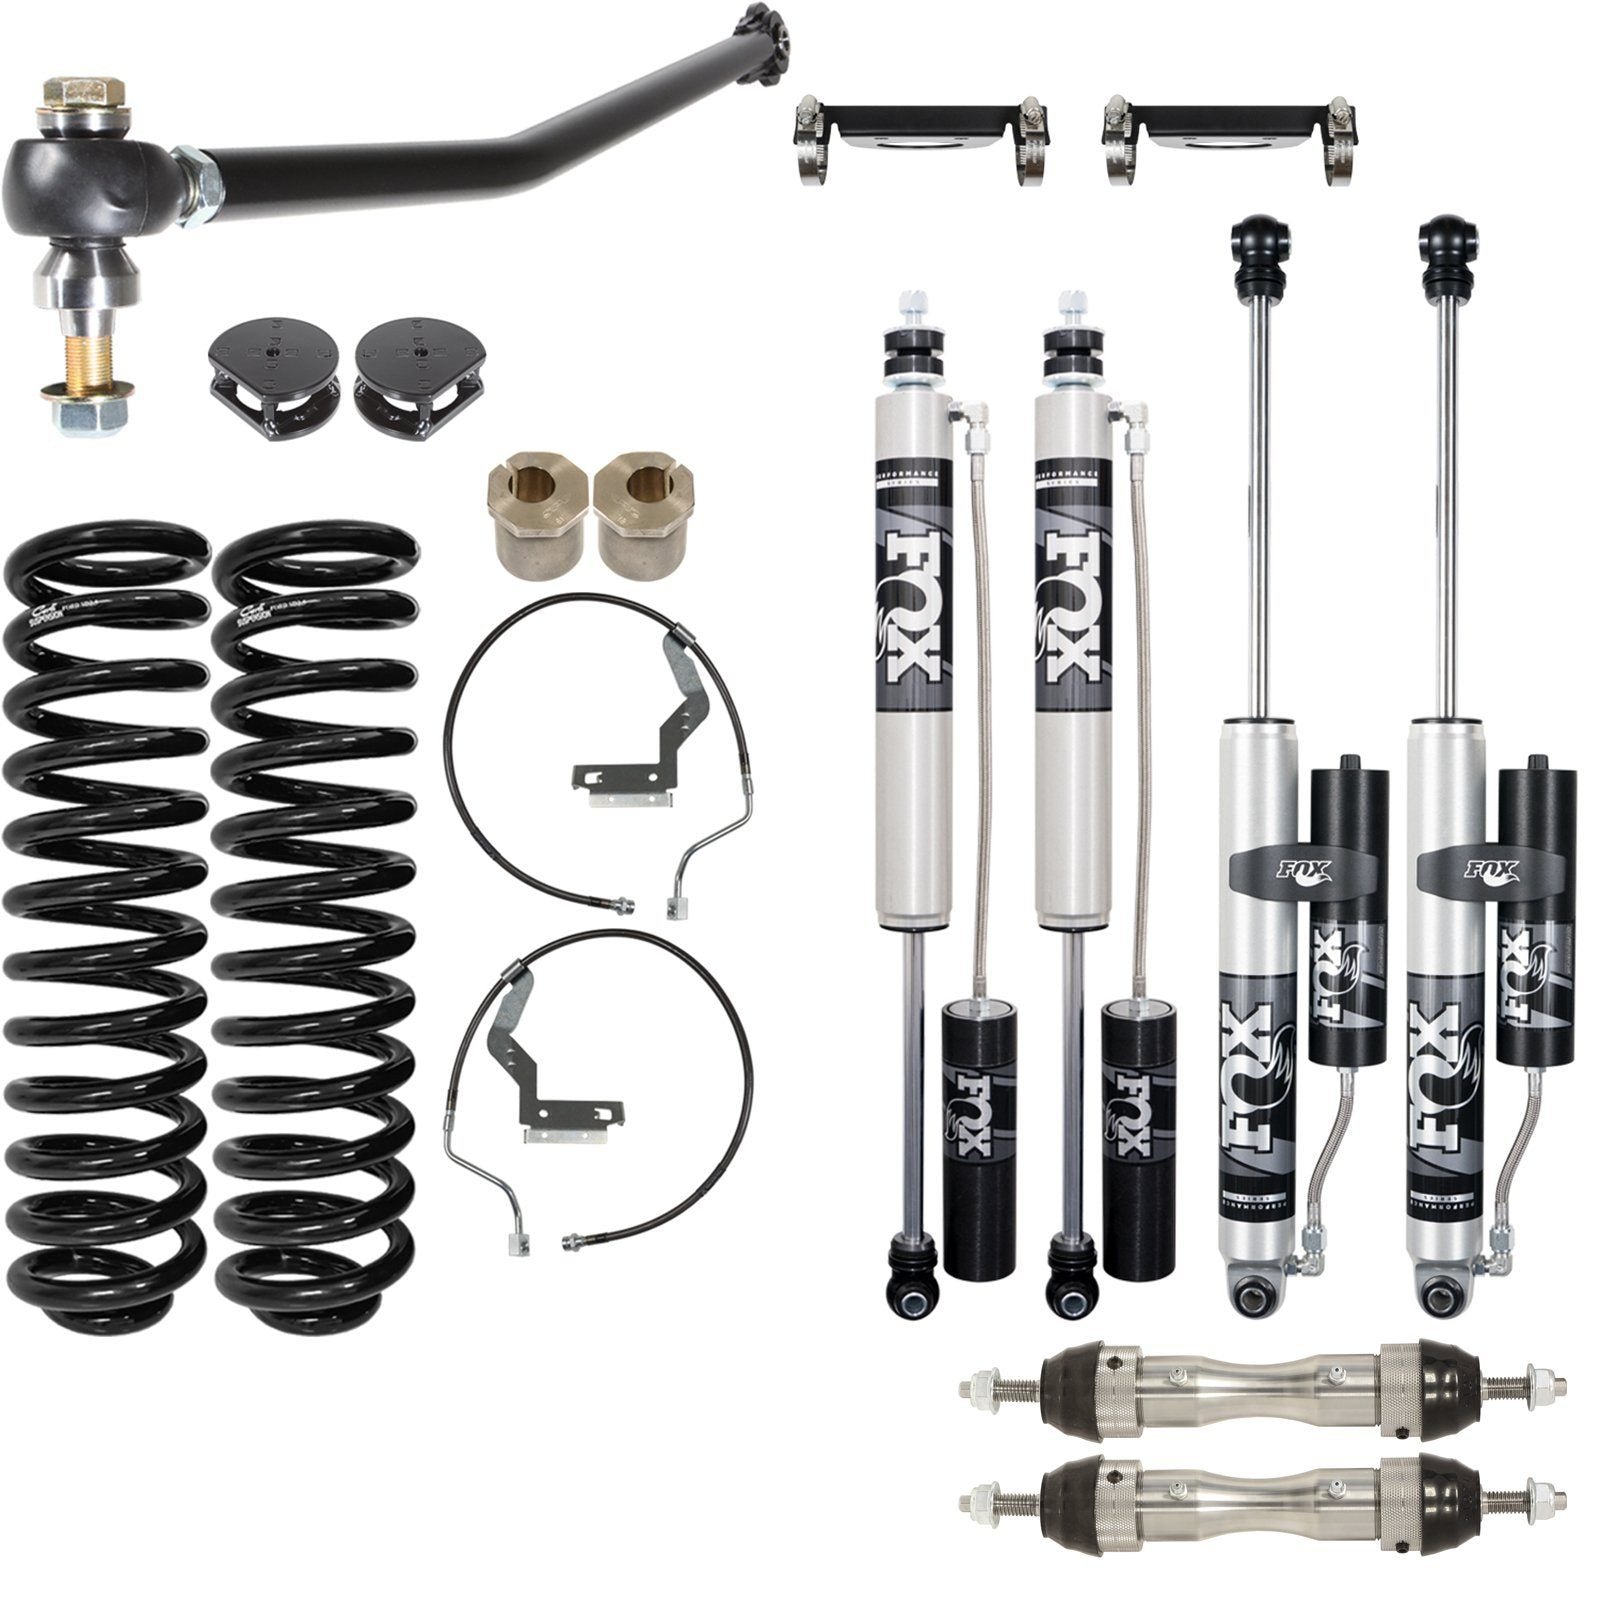 '17-23 Ford F250/350 6.2/7.3L Gas 2.0 Backcountry System Suspension Carli Suspension parts